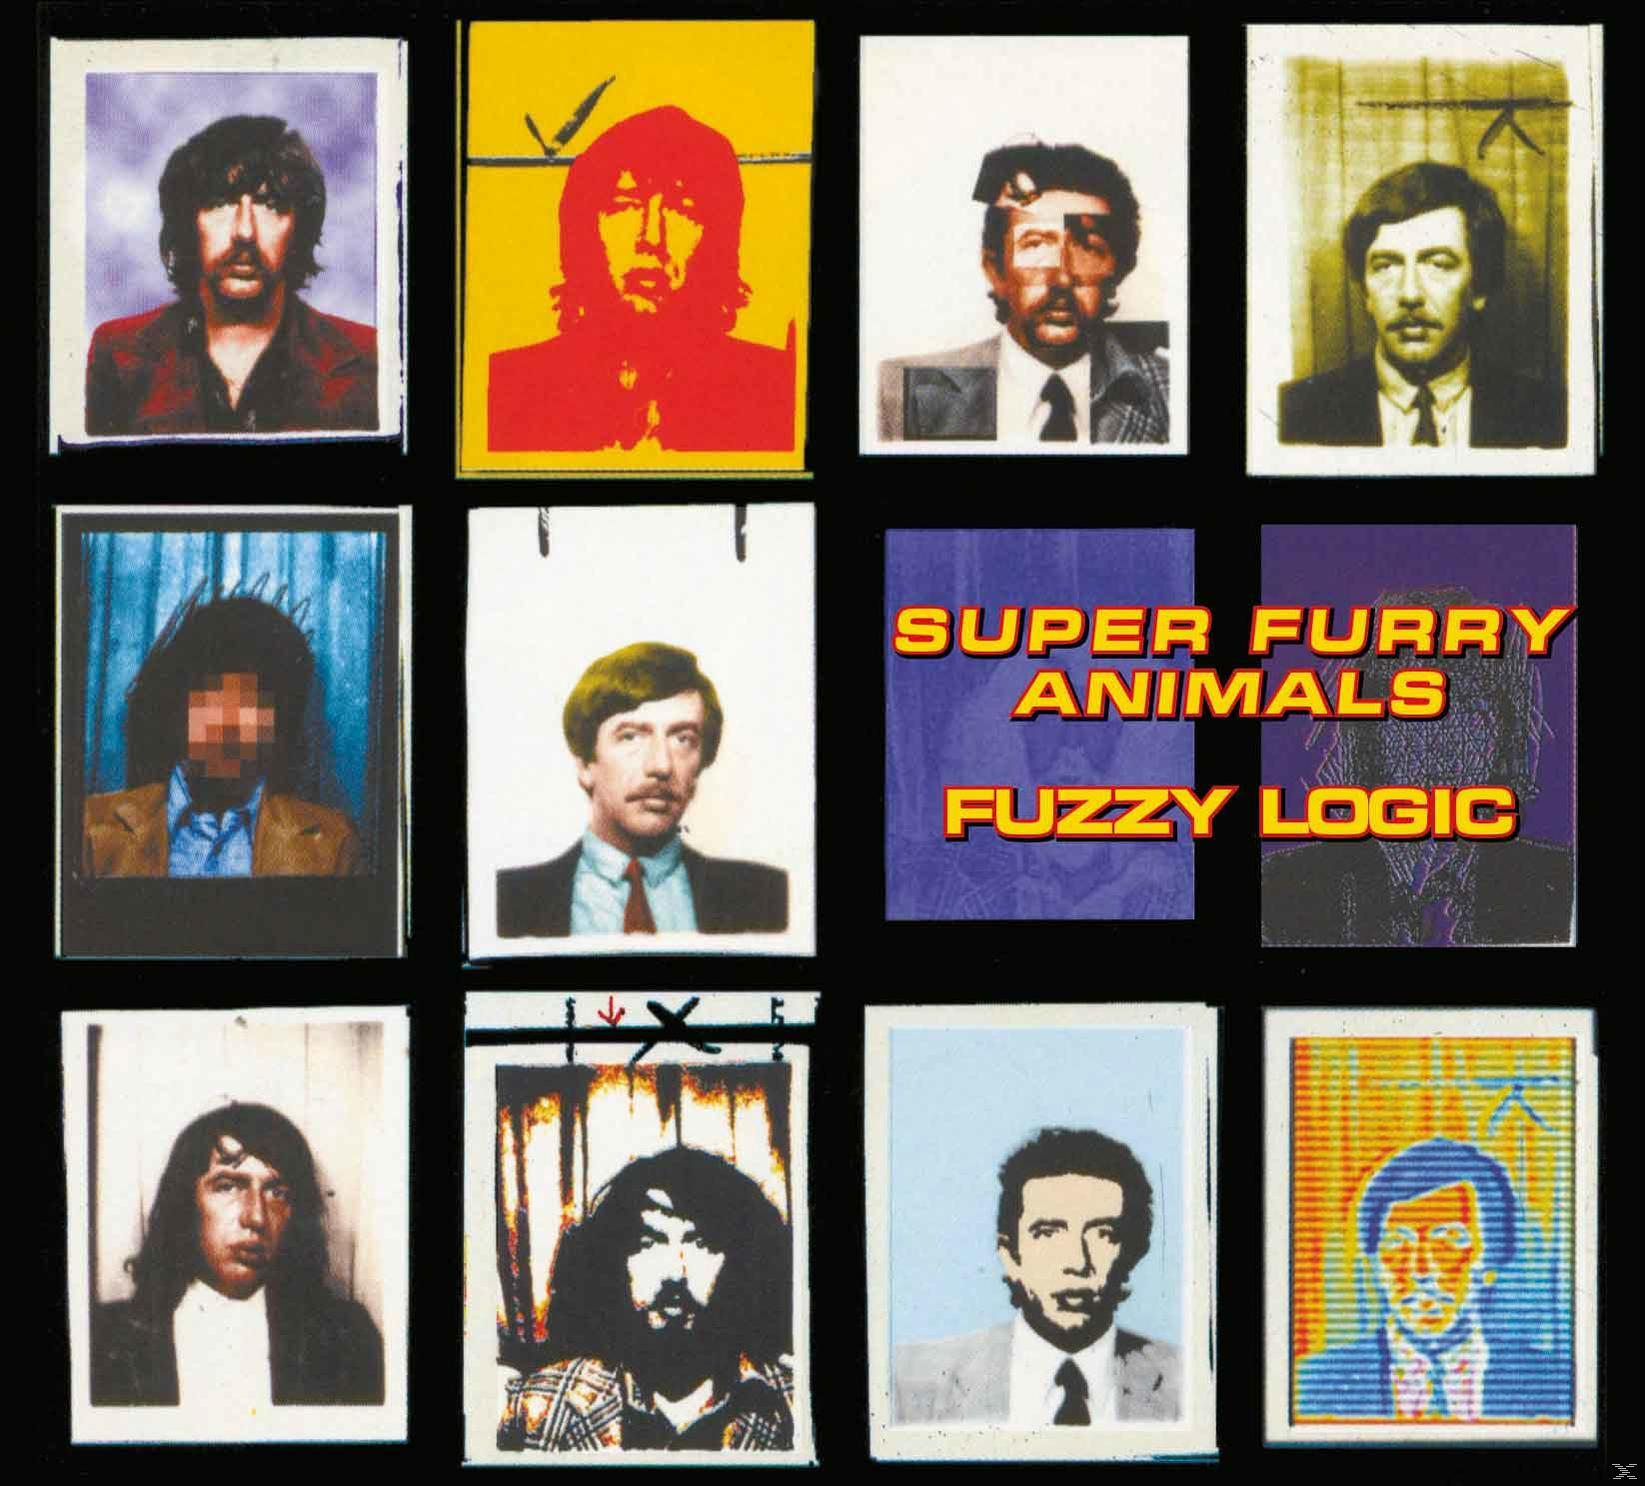 - Anniversary Logic Fuzzy - Super Deluxe (CD) Furry Edition) (20th Animals